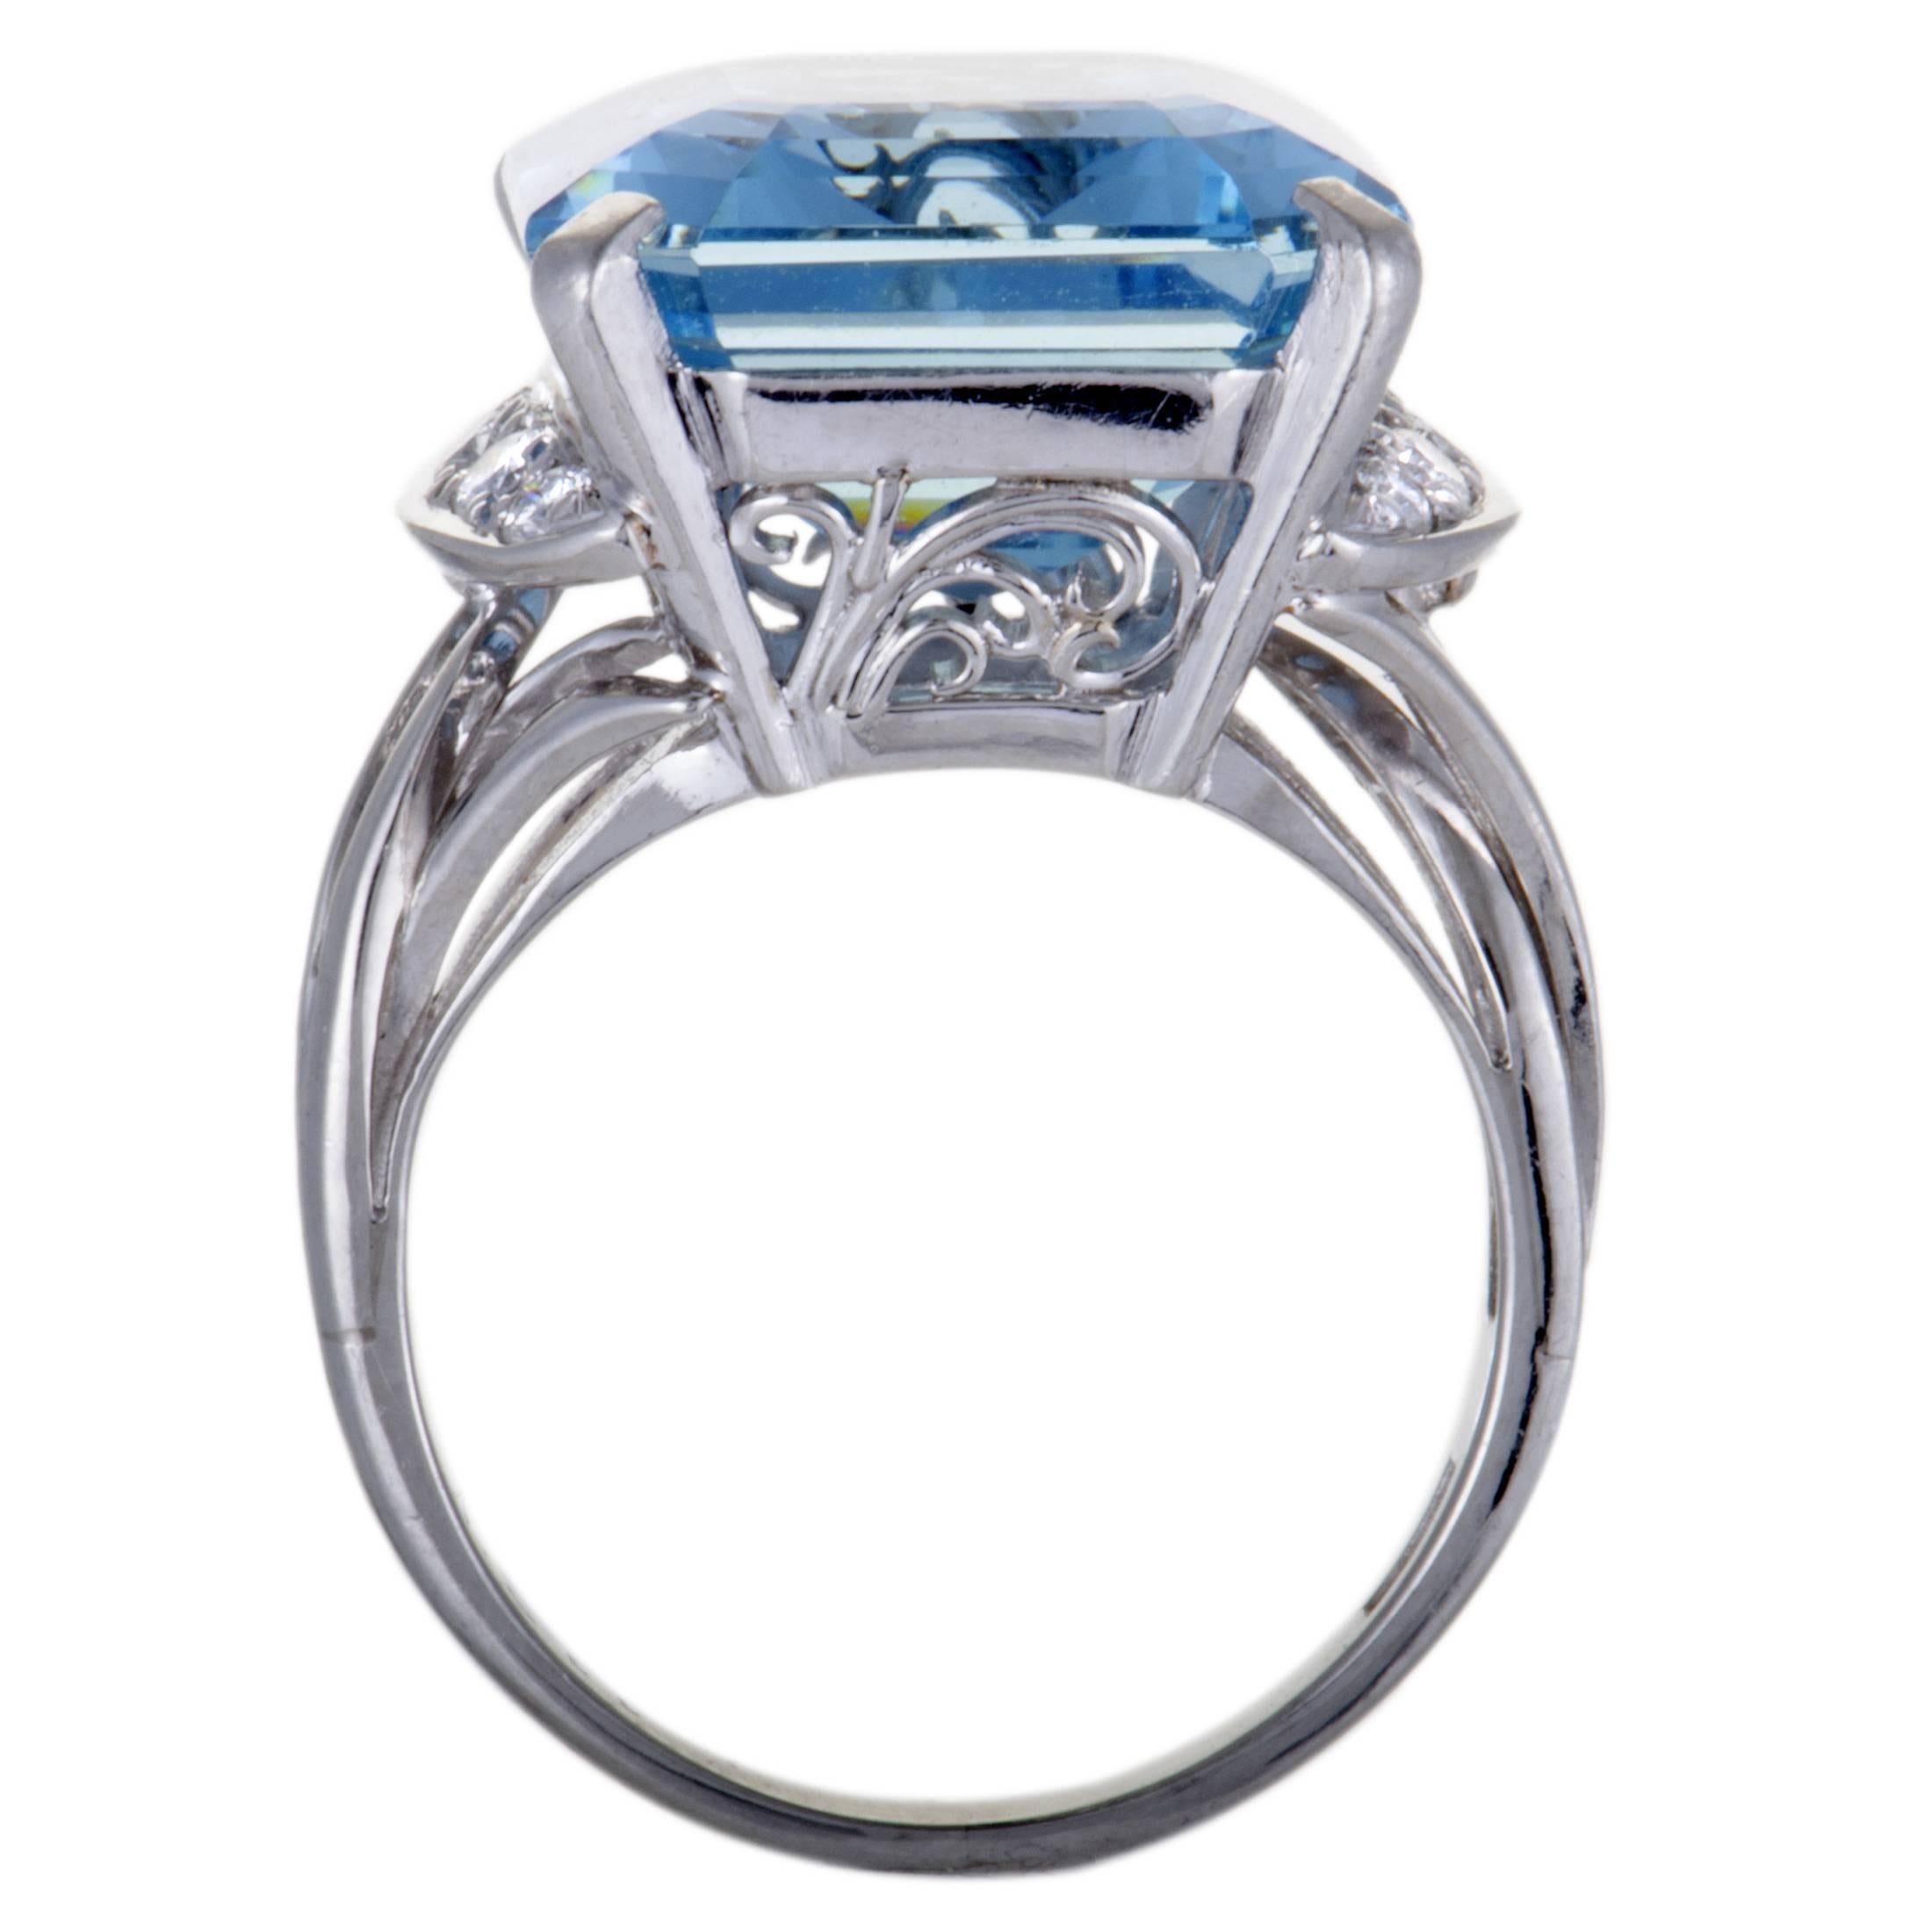 The endearingly intricate design and the spellbindingly bright-toned décor complement each other magnificently in this spectacular cocktail ring made of elegant platinum. The center stone of the ring is an alluring aquamarine that weighs 11.31